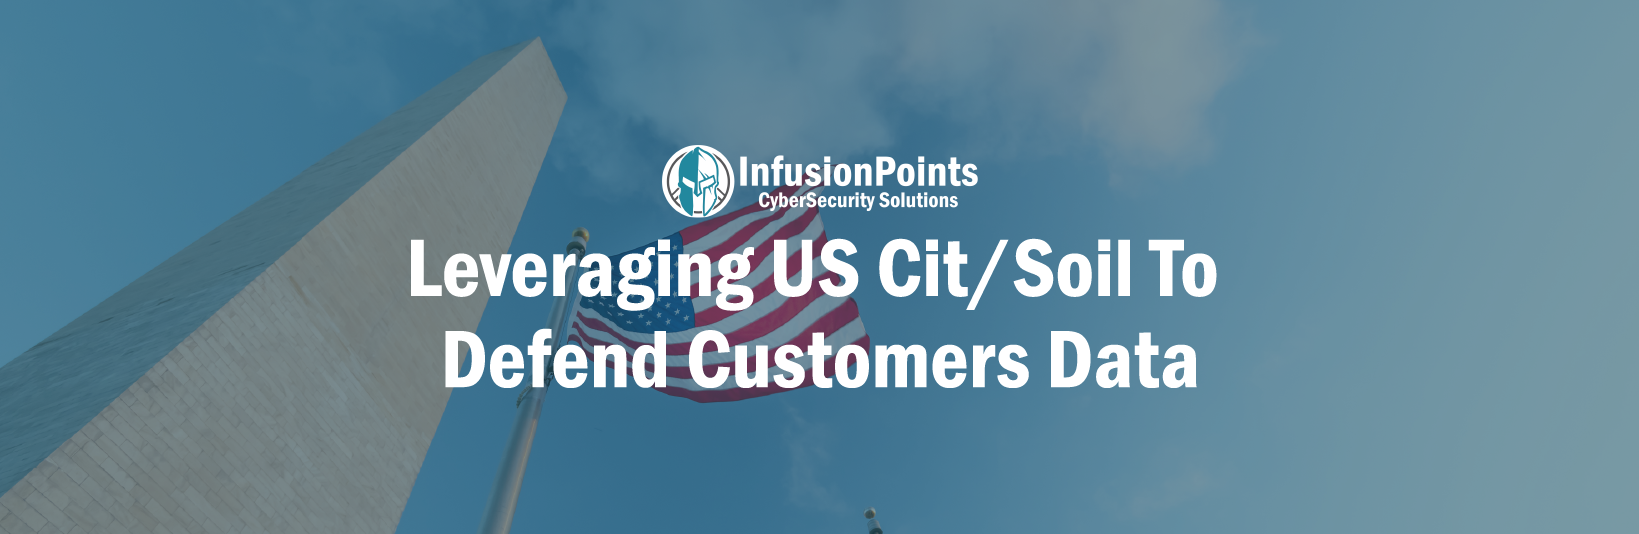 Leveraging US Cit/Soil to defend Customers Data